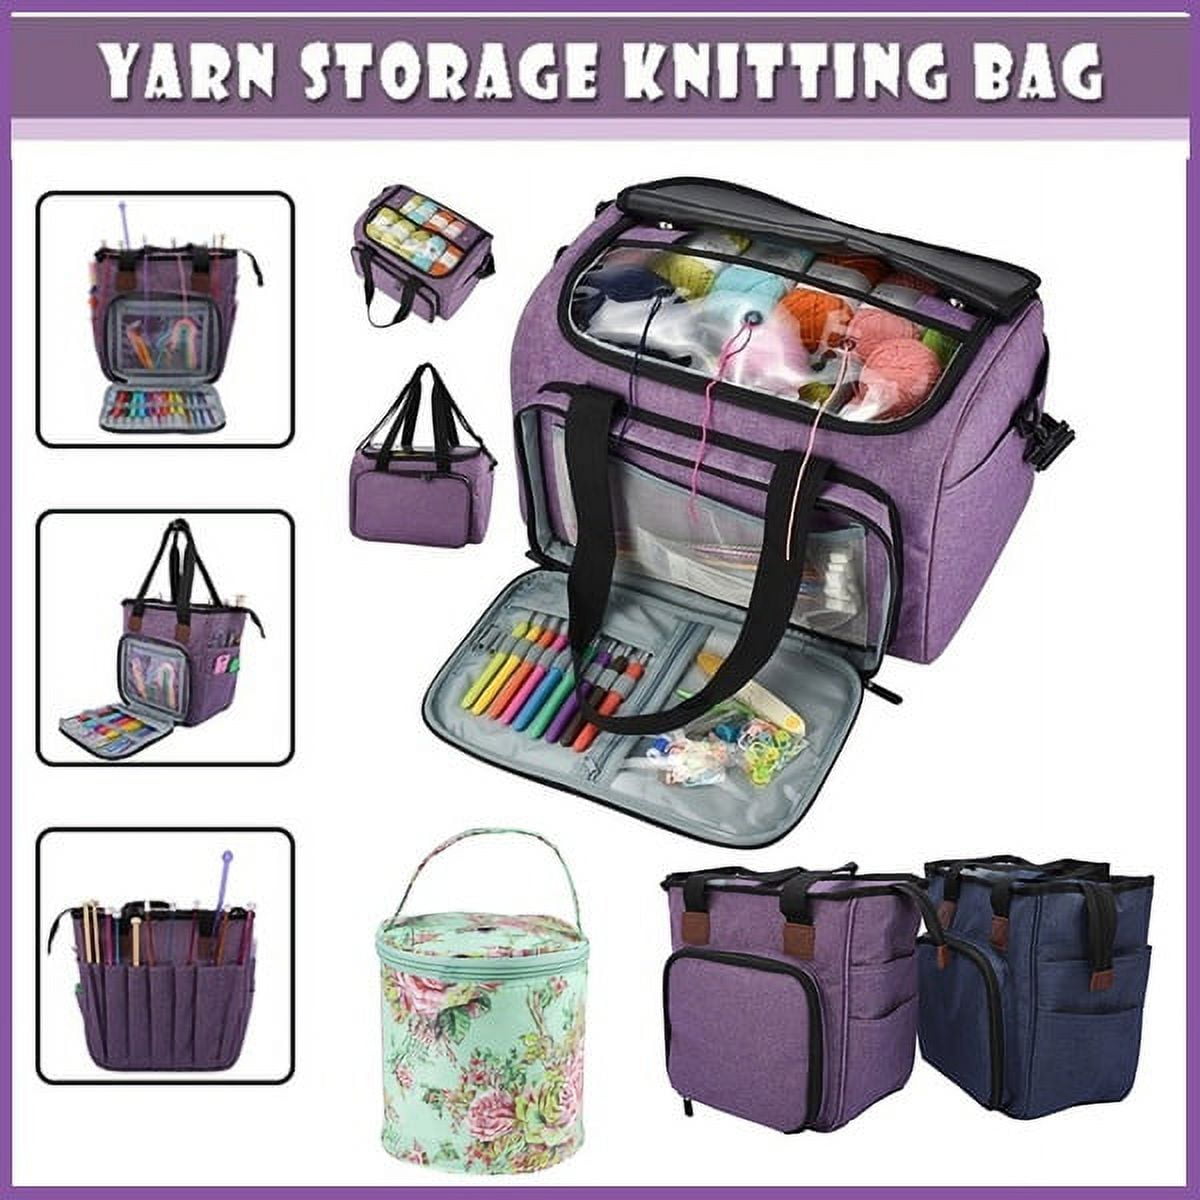 SumDirect Yarn Bag, Knitting Organizer Tote Bag Portable Storage Bag for  Yarns, Carrying Projects, Knitting Needles, Crochet Hooks, Manuals and  Other